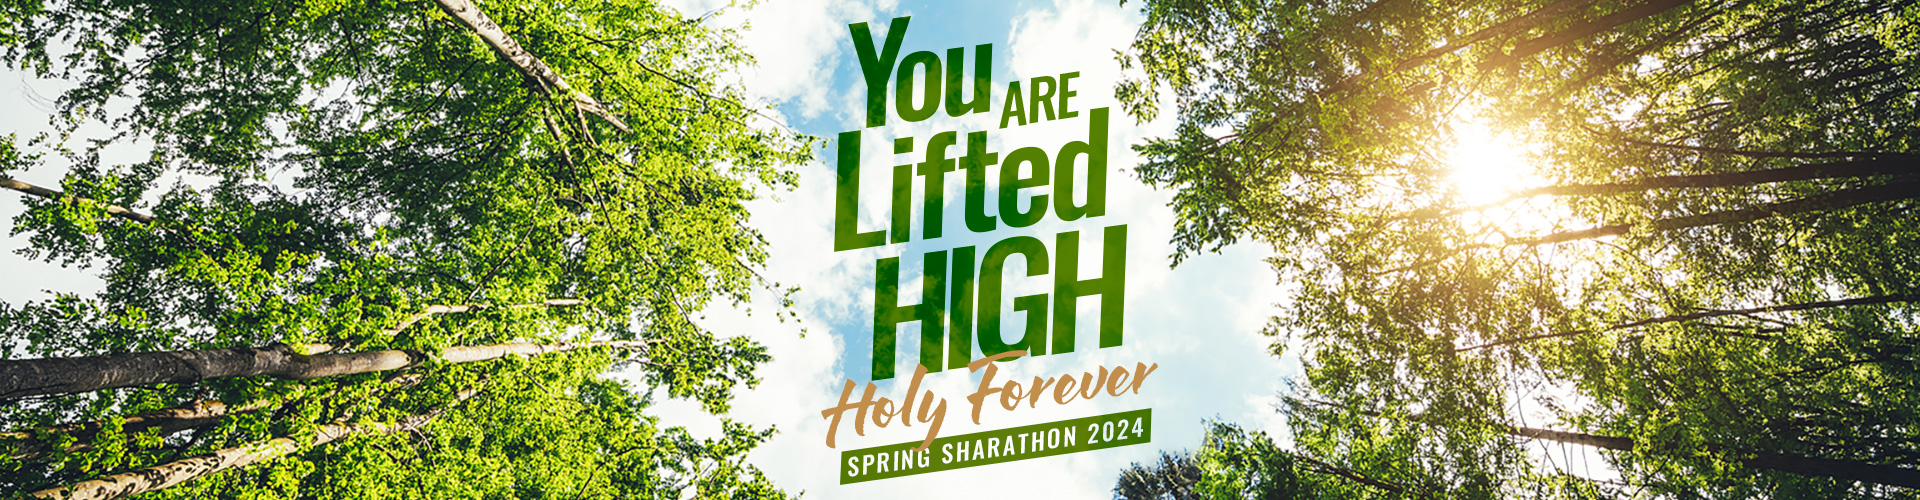 Spring Sharathon 2024 Header image. You are Lifted High Holy Forever